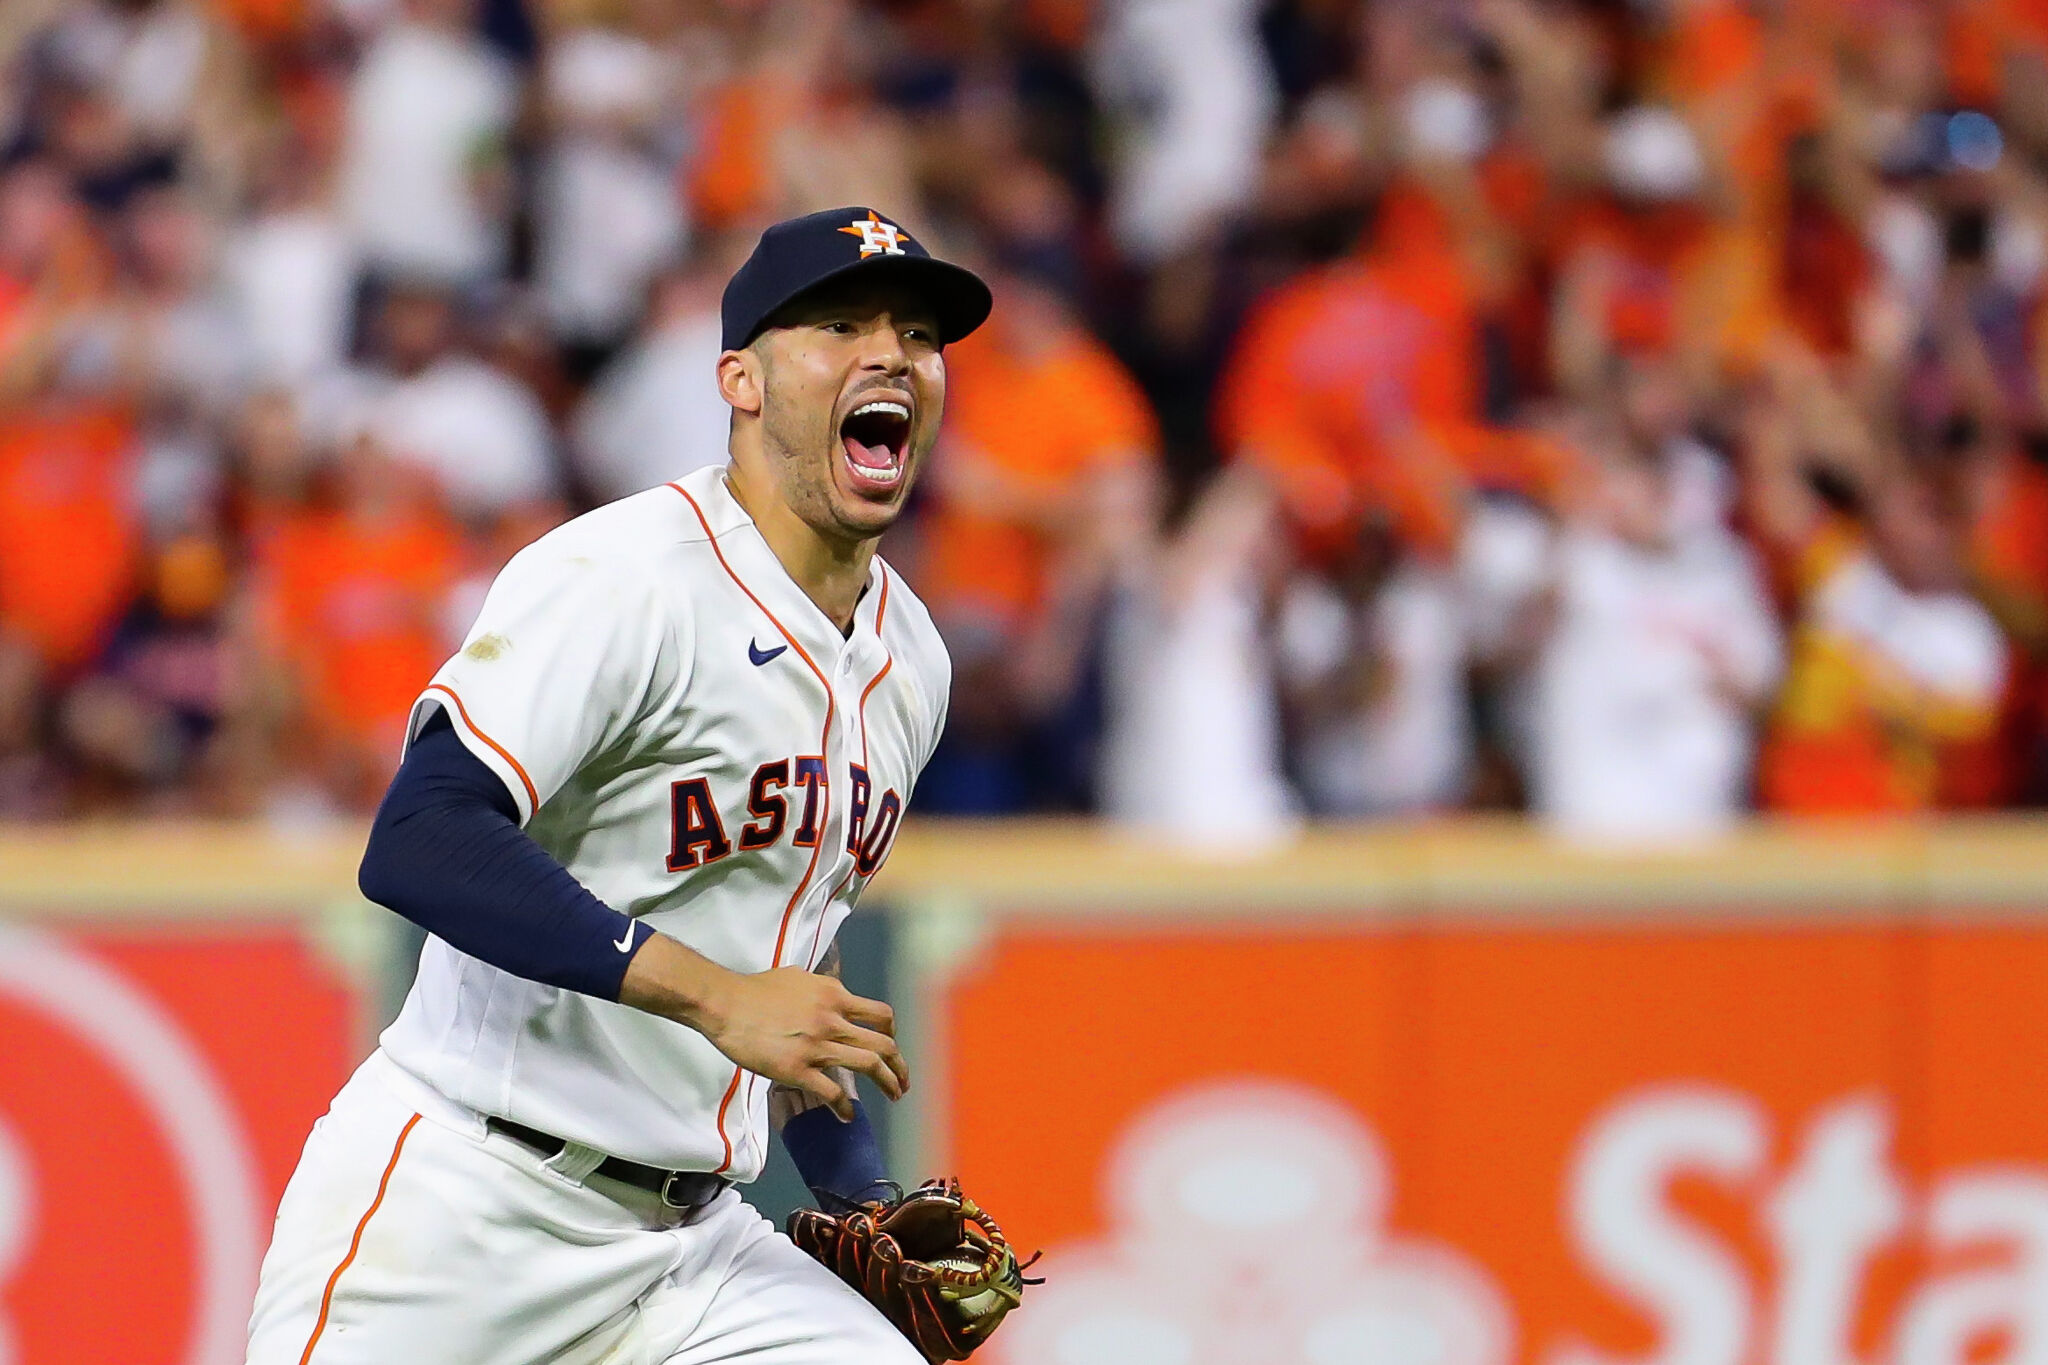 Carlos Correa Forgives Astros Fans For Booing Him, But His Revenge Game  Could Haunt Houston's Baseball Dynasty